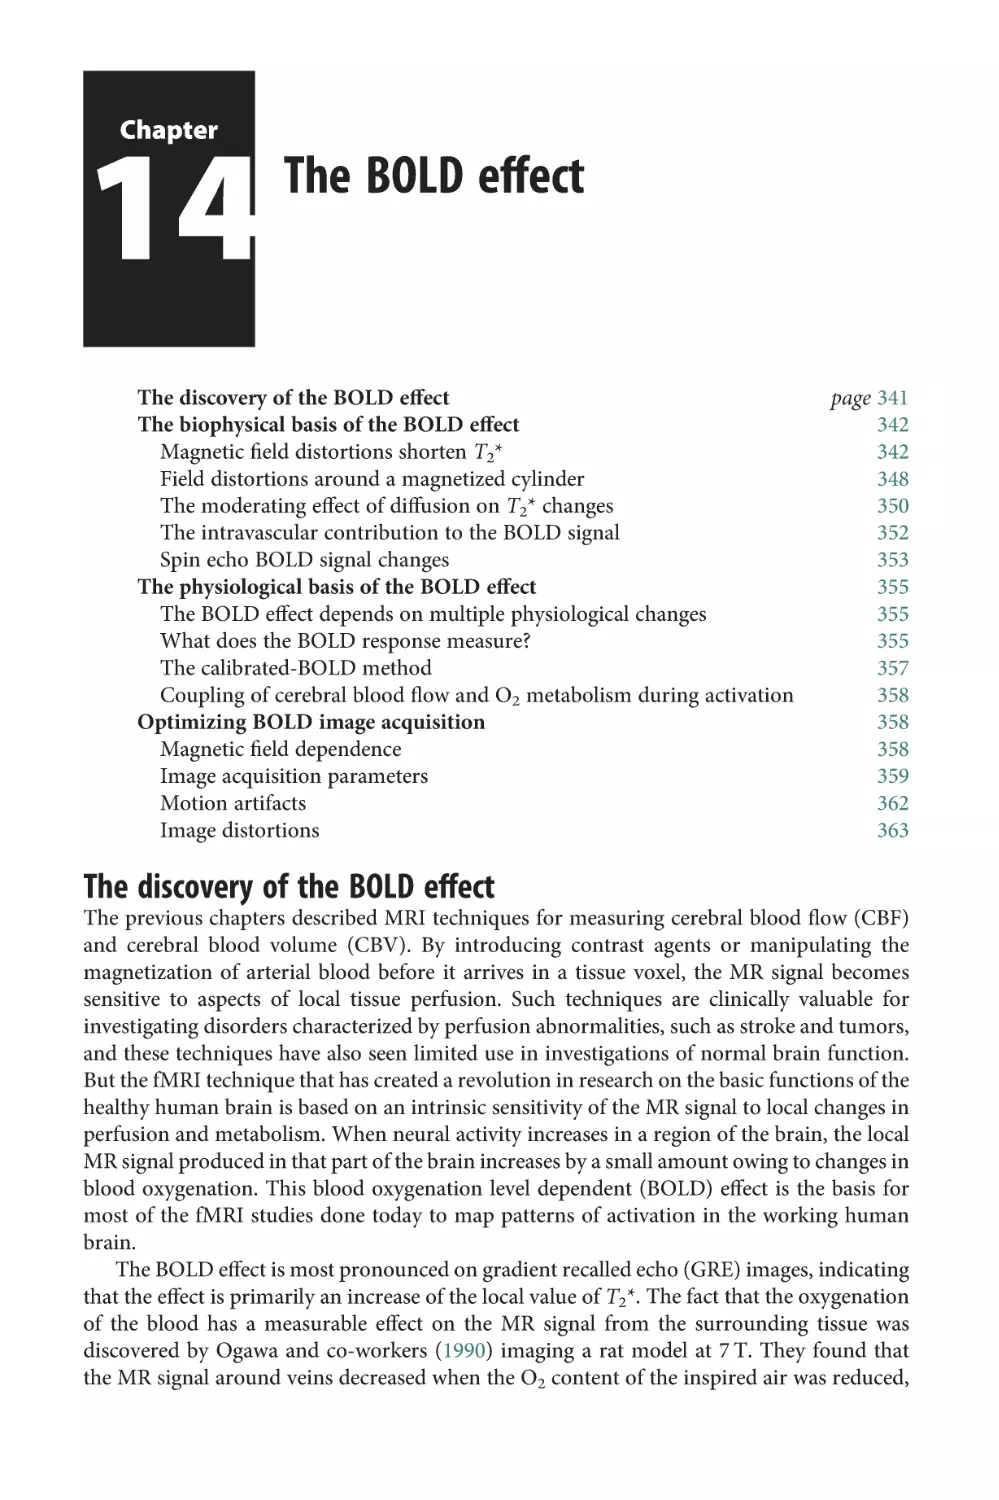 Chapter 14 The BOLD effect
The discovery of the BOLD effect